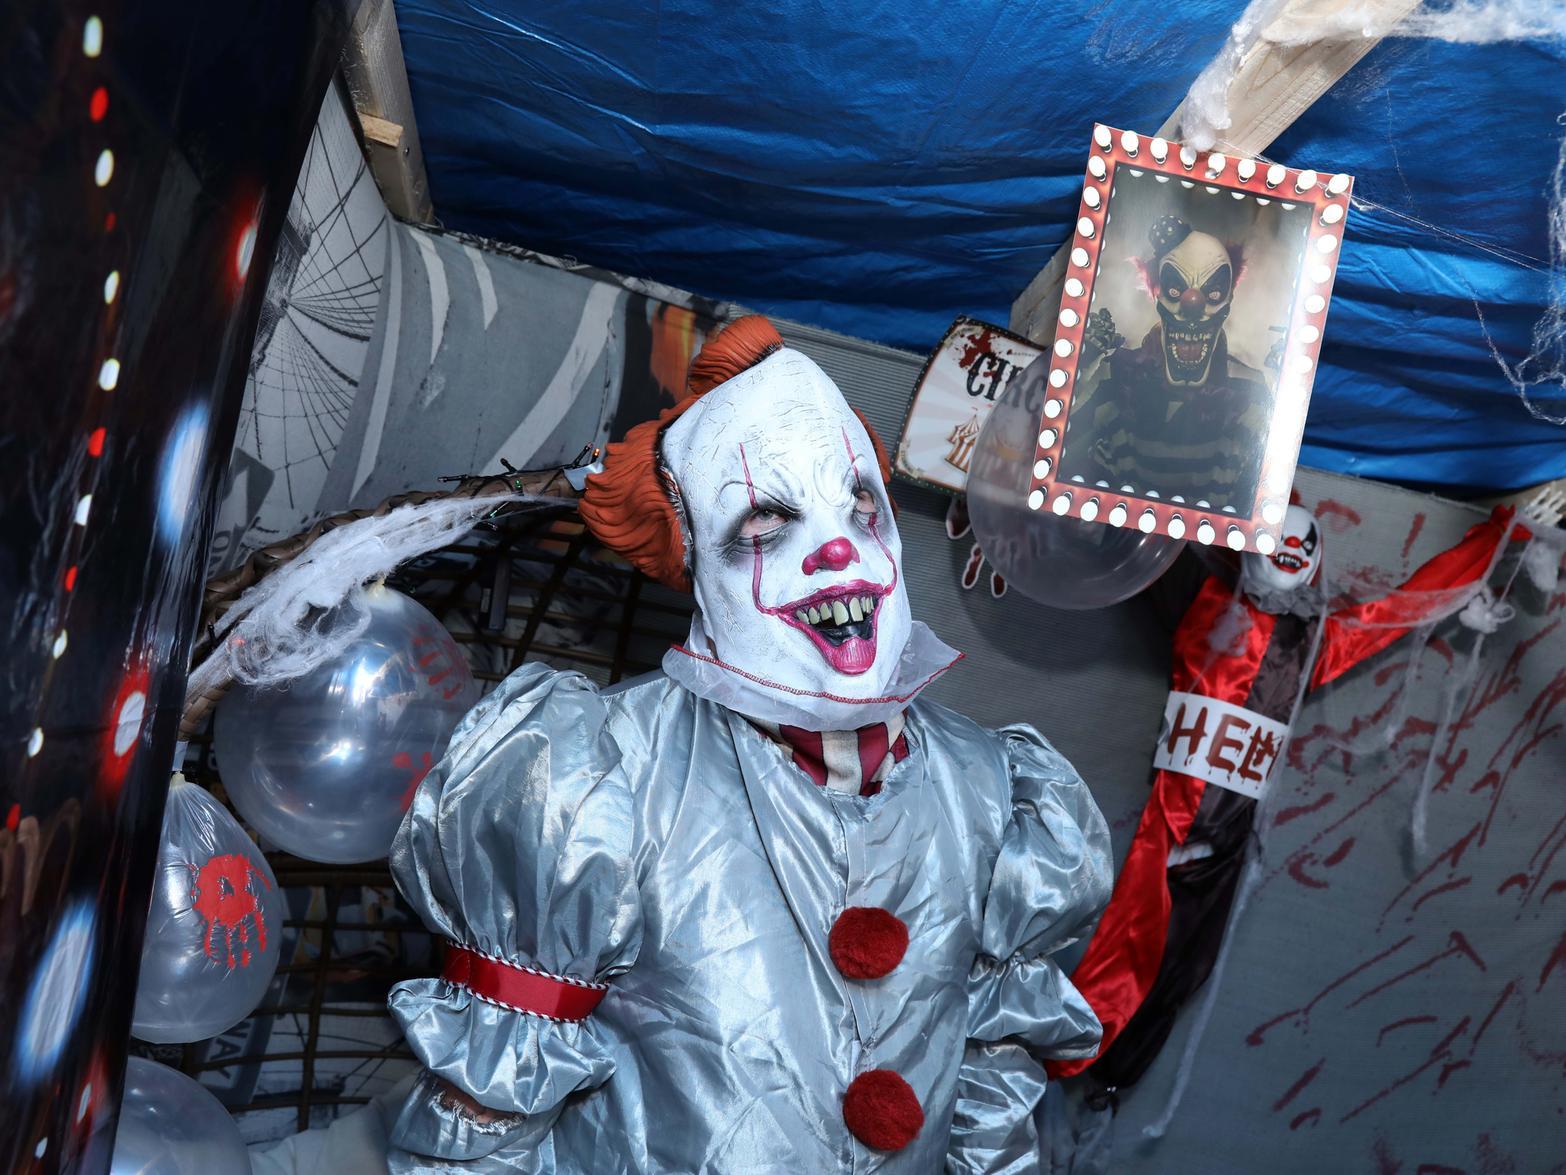 What House of Horrors would be complete without a Pennywise